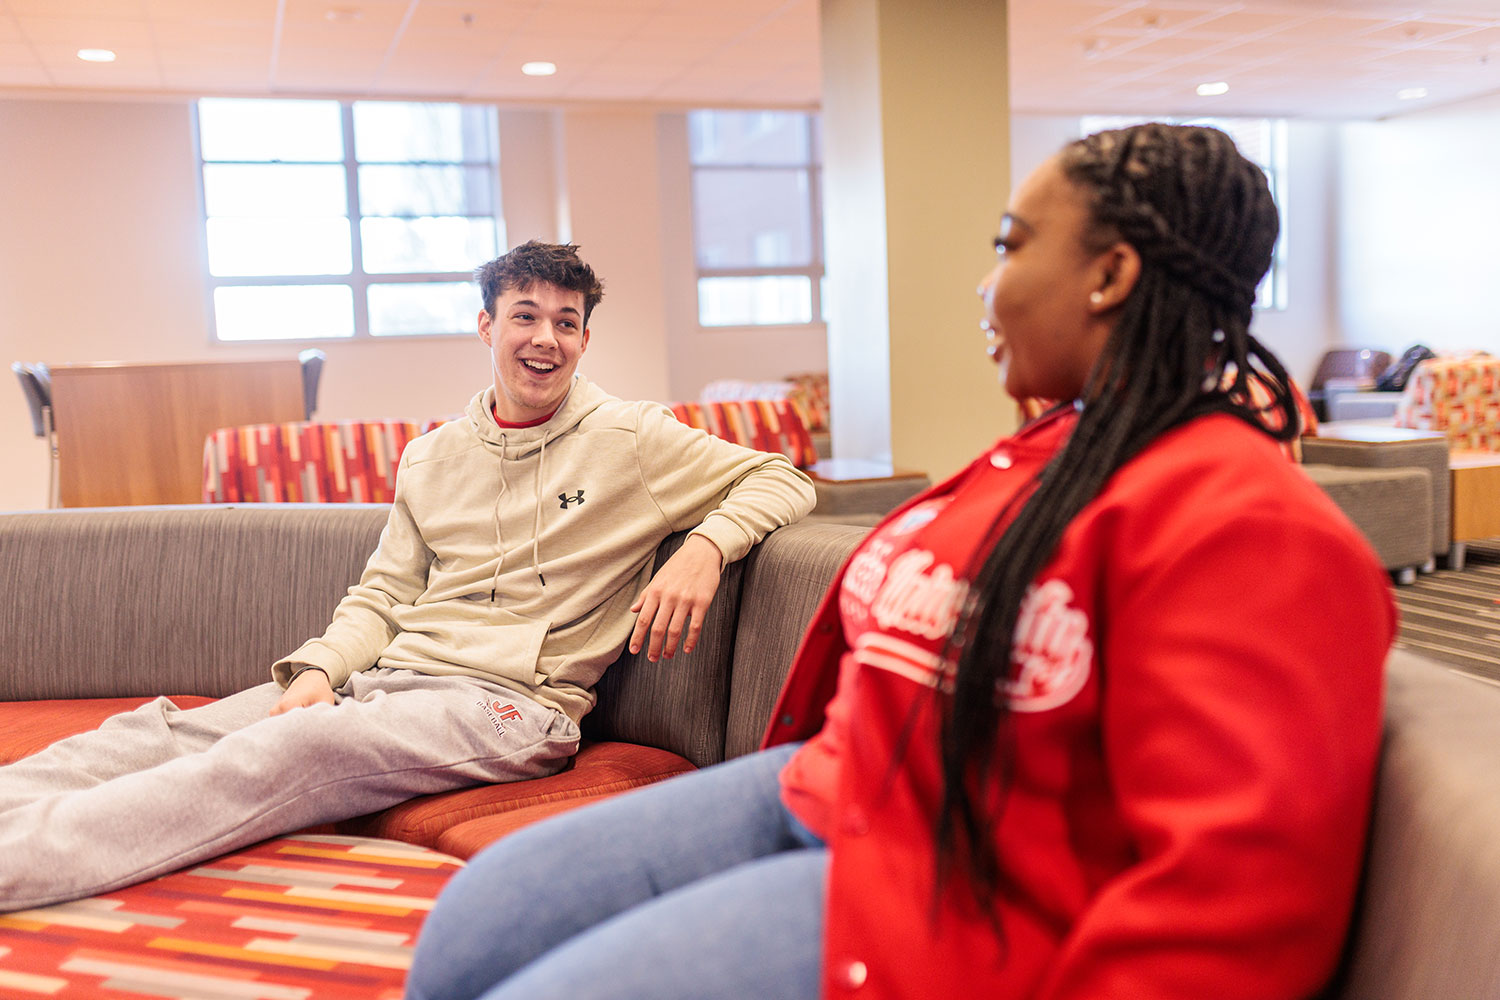 Two students sitting and chatting in a lounge area.